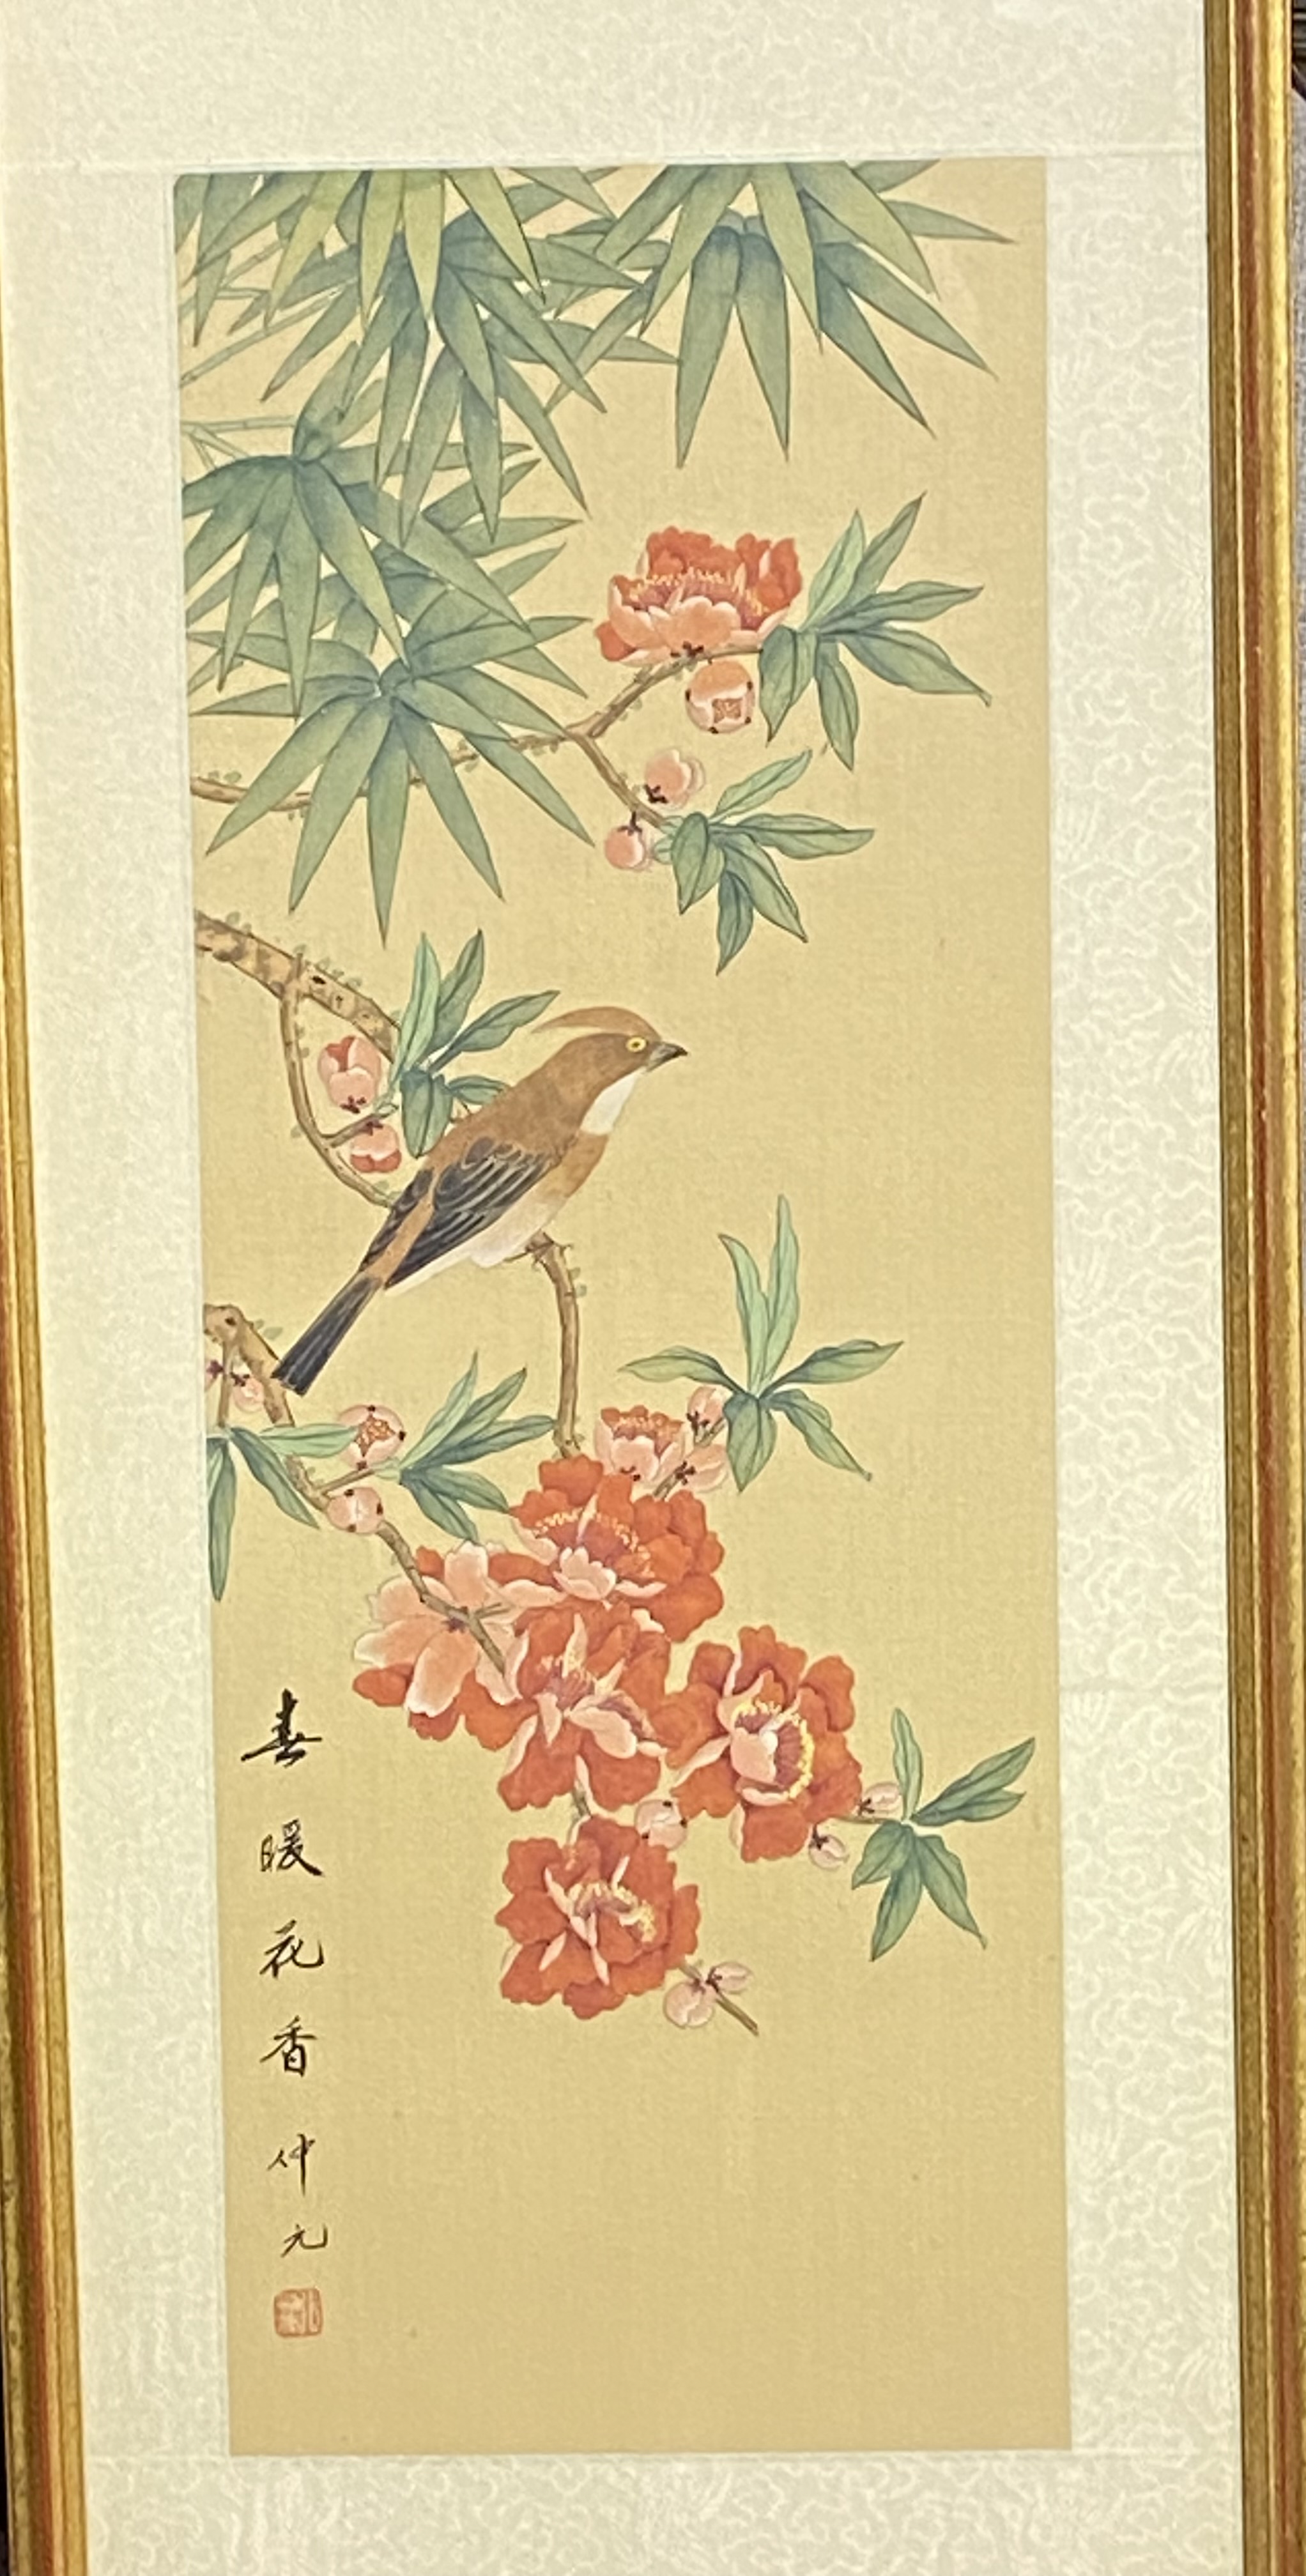 Framed and glazed Japanese woodblock print - Image 3 of 5